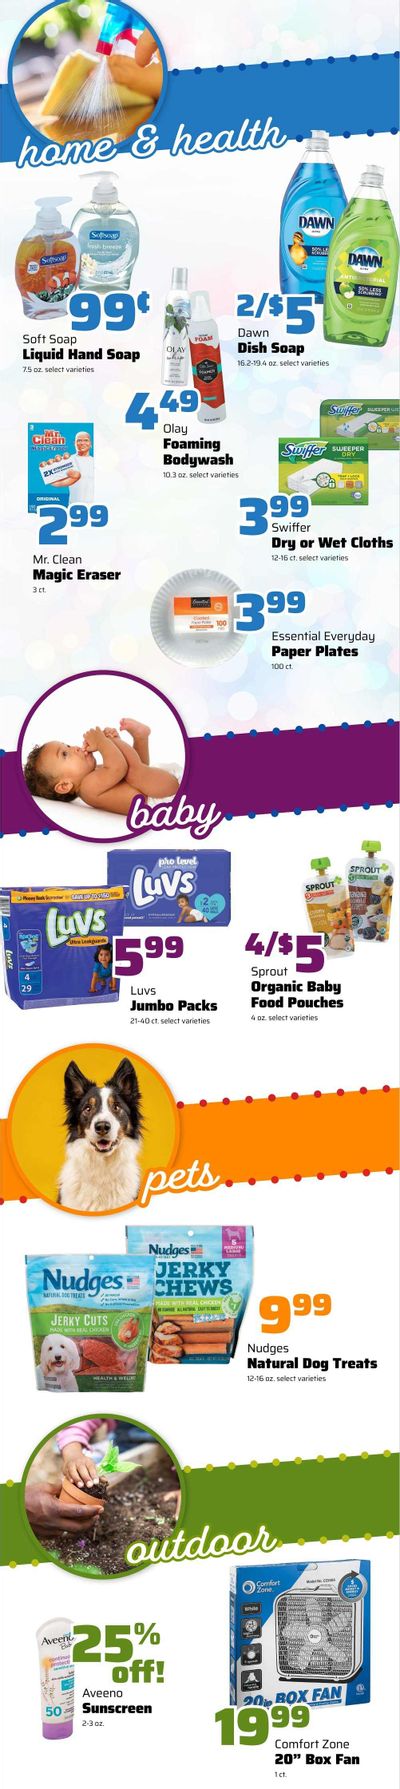 County Market (IL, IN, MO) Weekly Ad Flyer June 2 to June 8